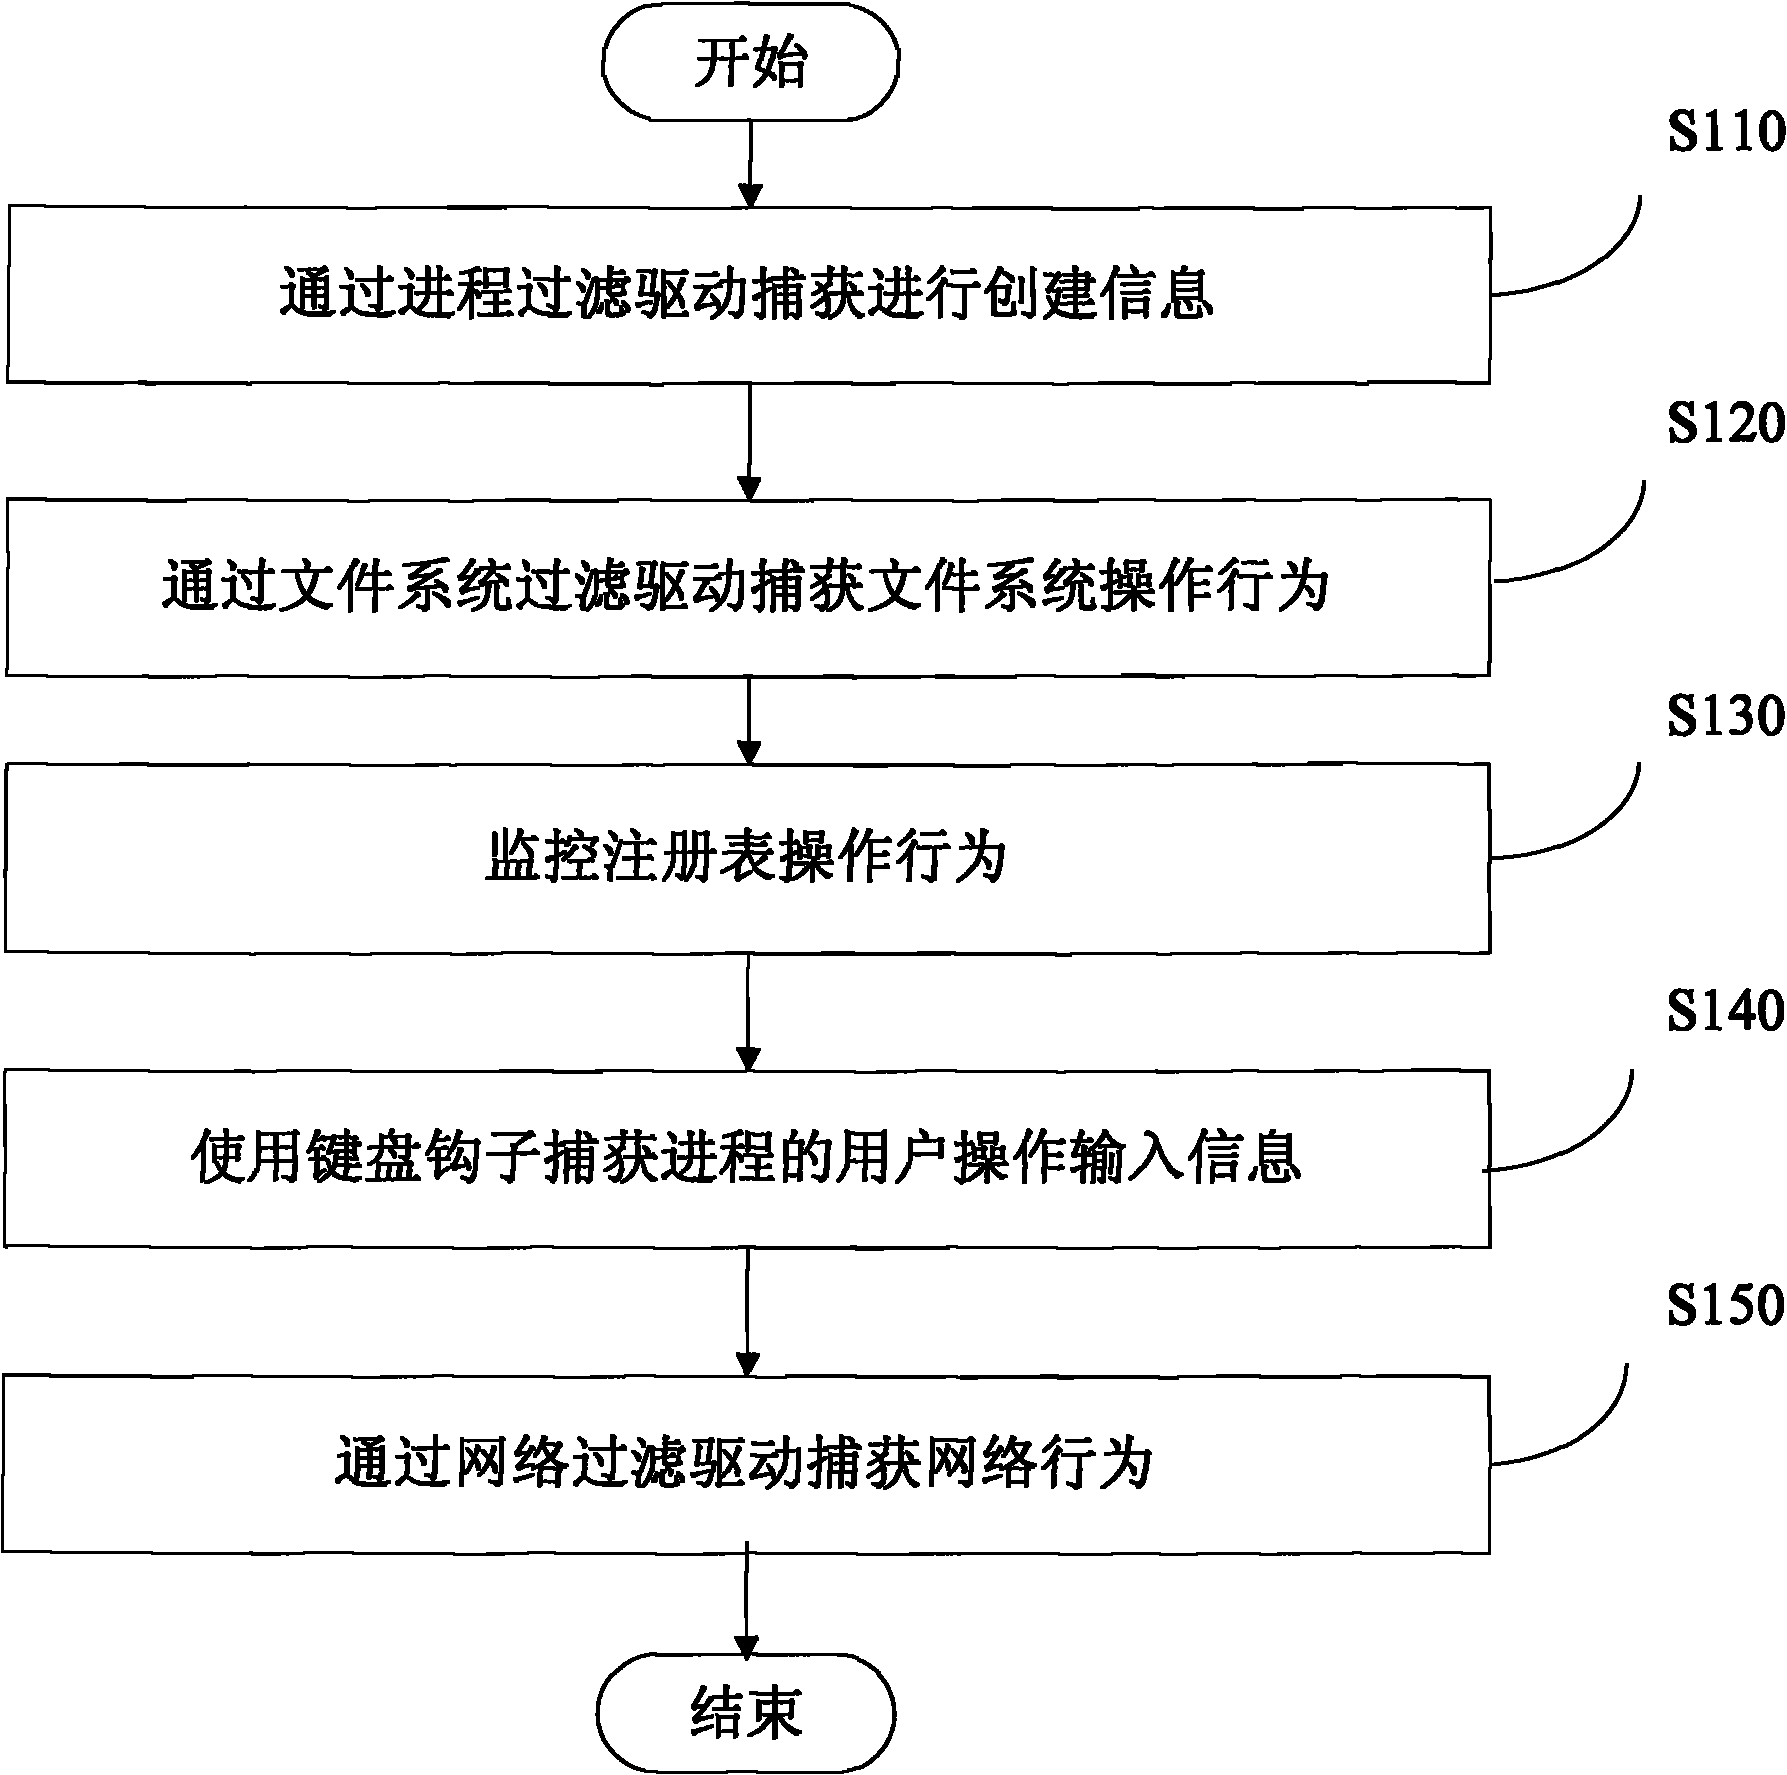 Method and system for identifying malicious program